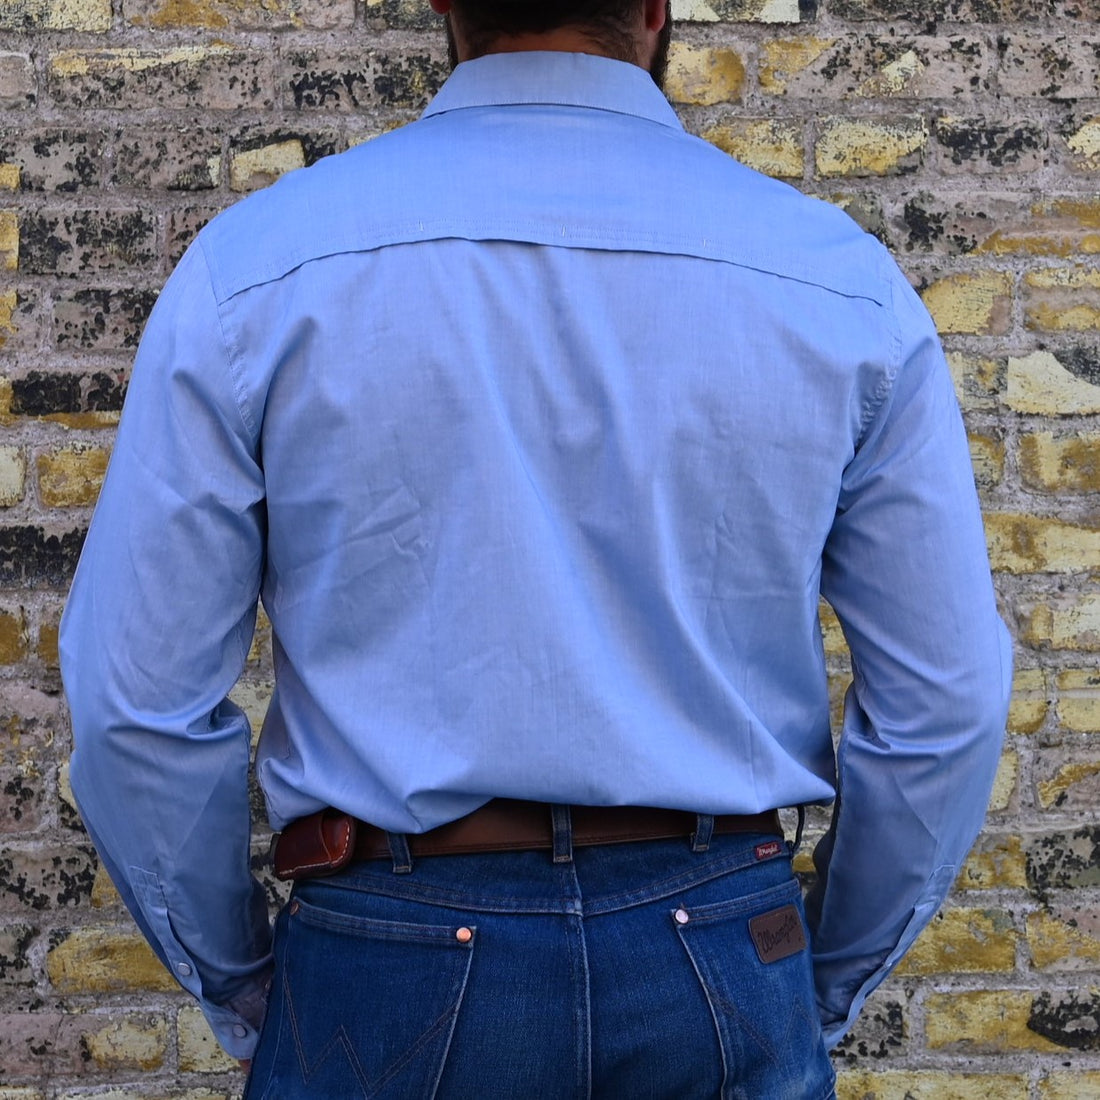 Gaucho Snapshirt-Irie Hibiscus in Faded Blue Oxford view of back